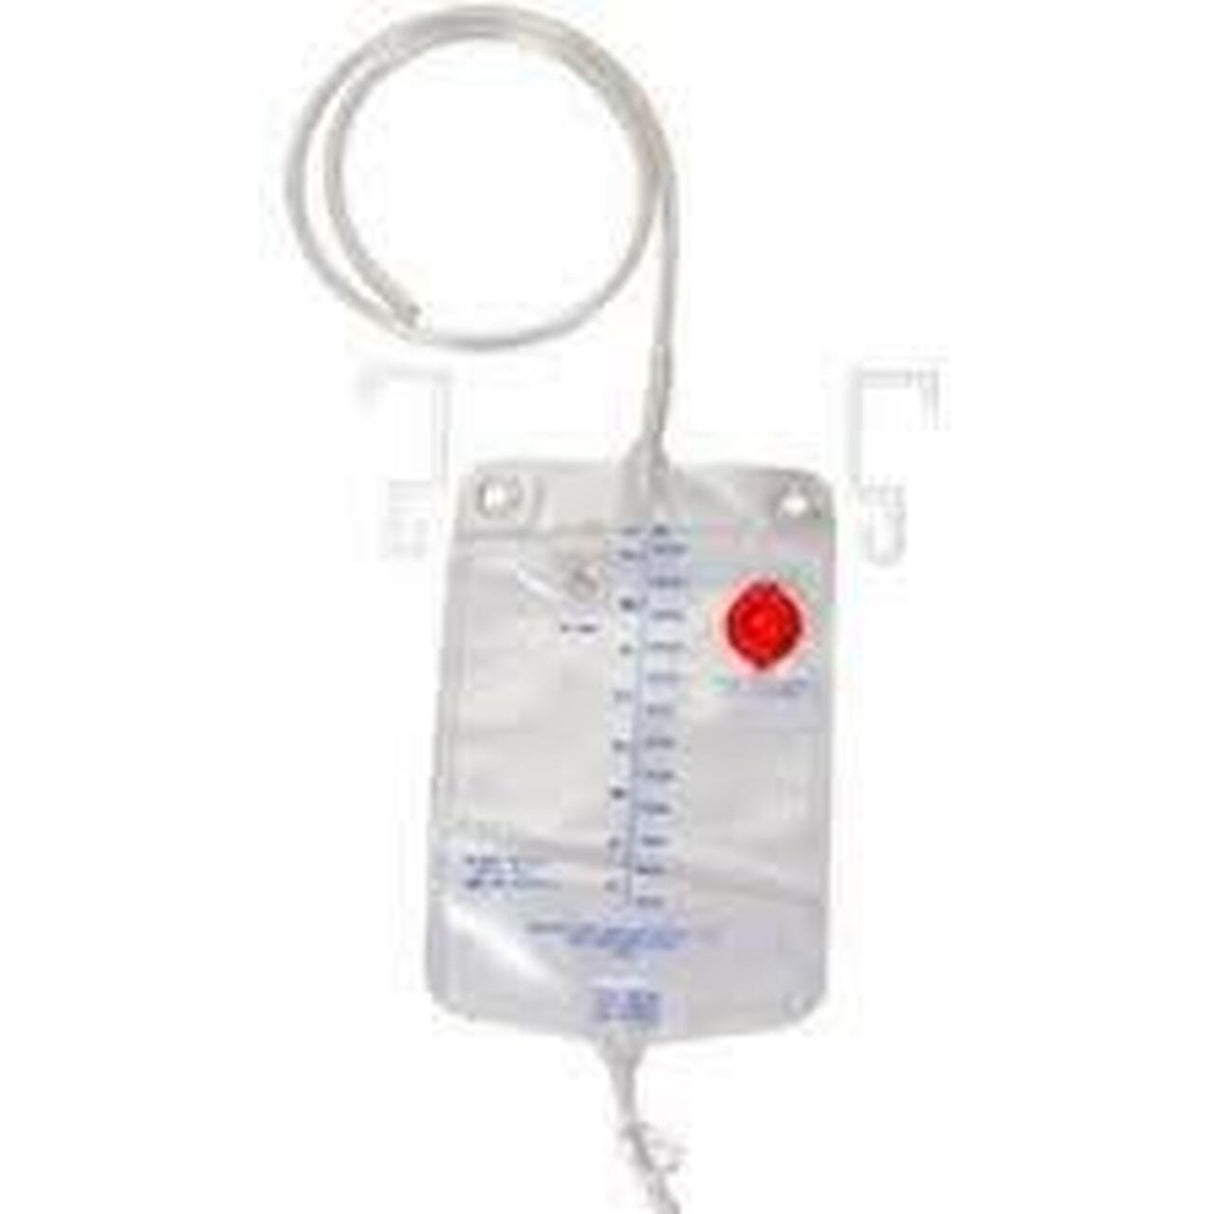 Image of Urinary Bedside Drainage Bag Kit with Connector and Seal